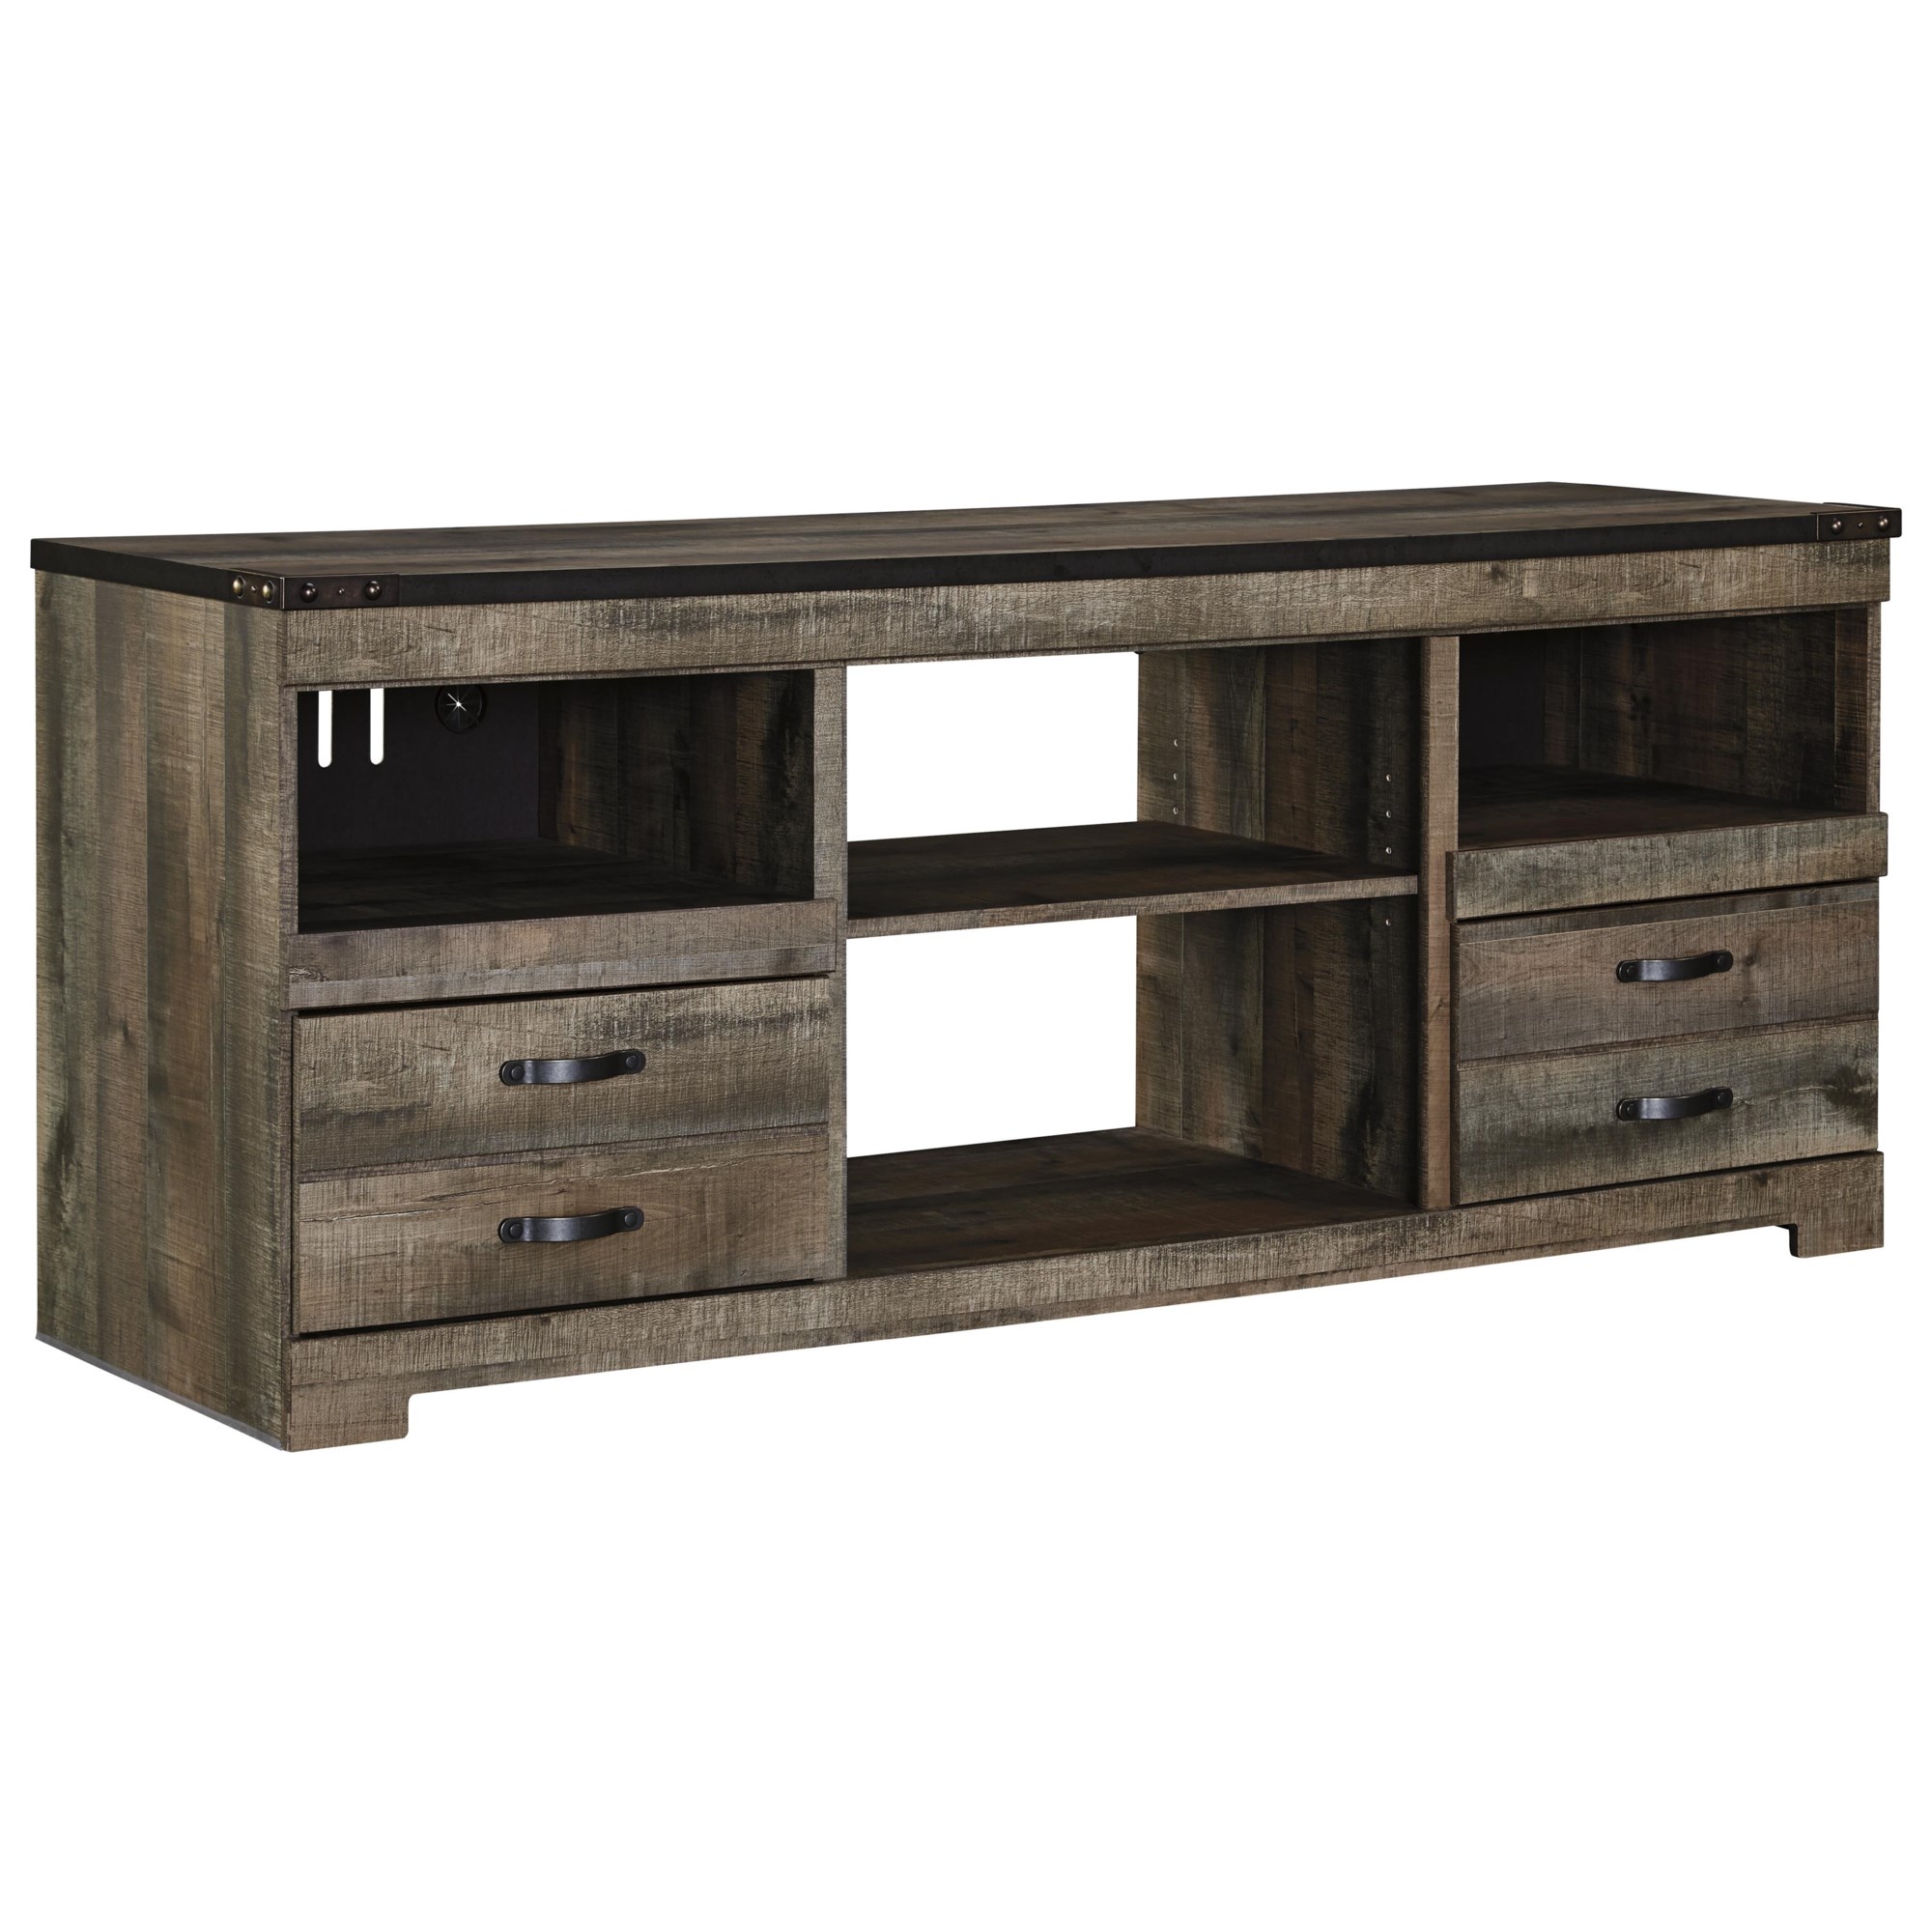 Signature Design By Ashley Trinell Entcns44668 Rustic Large Tv Stand